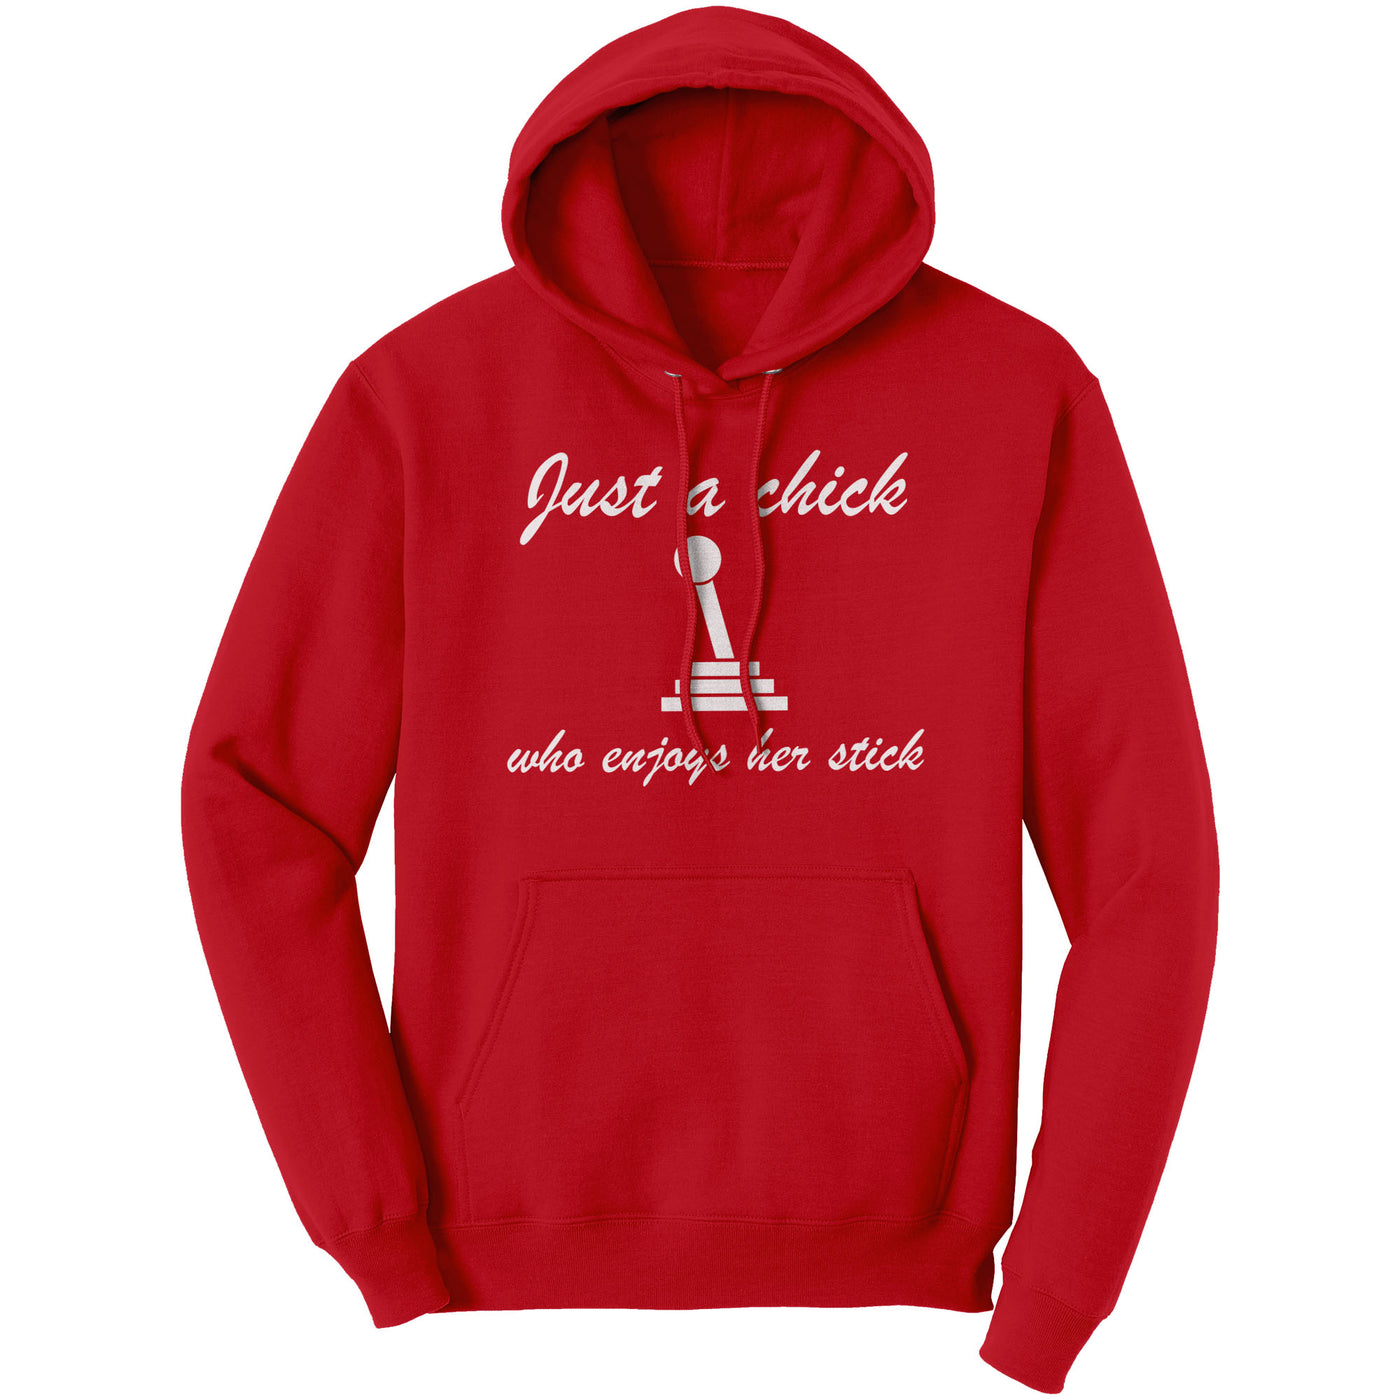 just-a-chick-who-enjoys-her-stick-hoodie-red